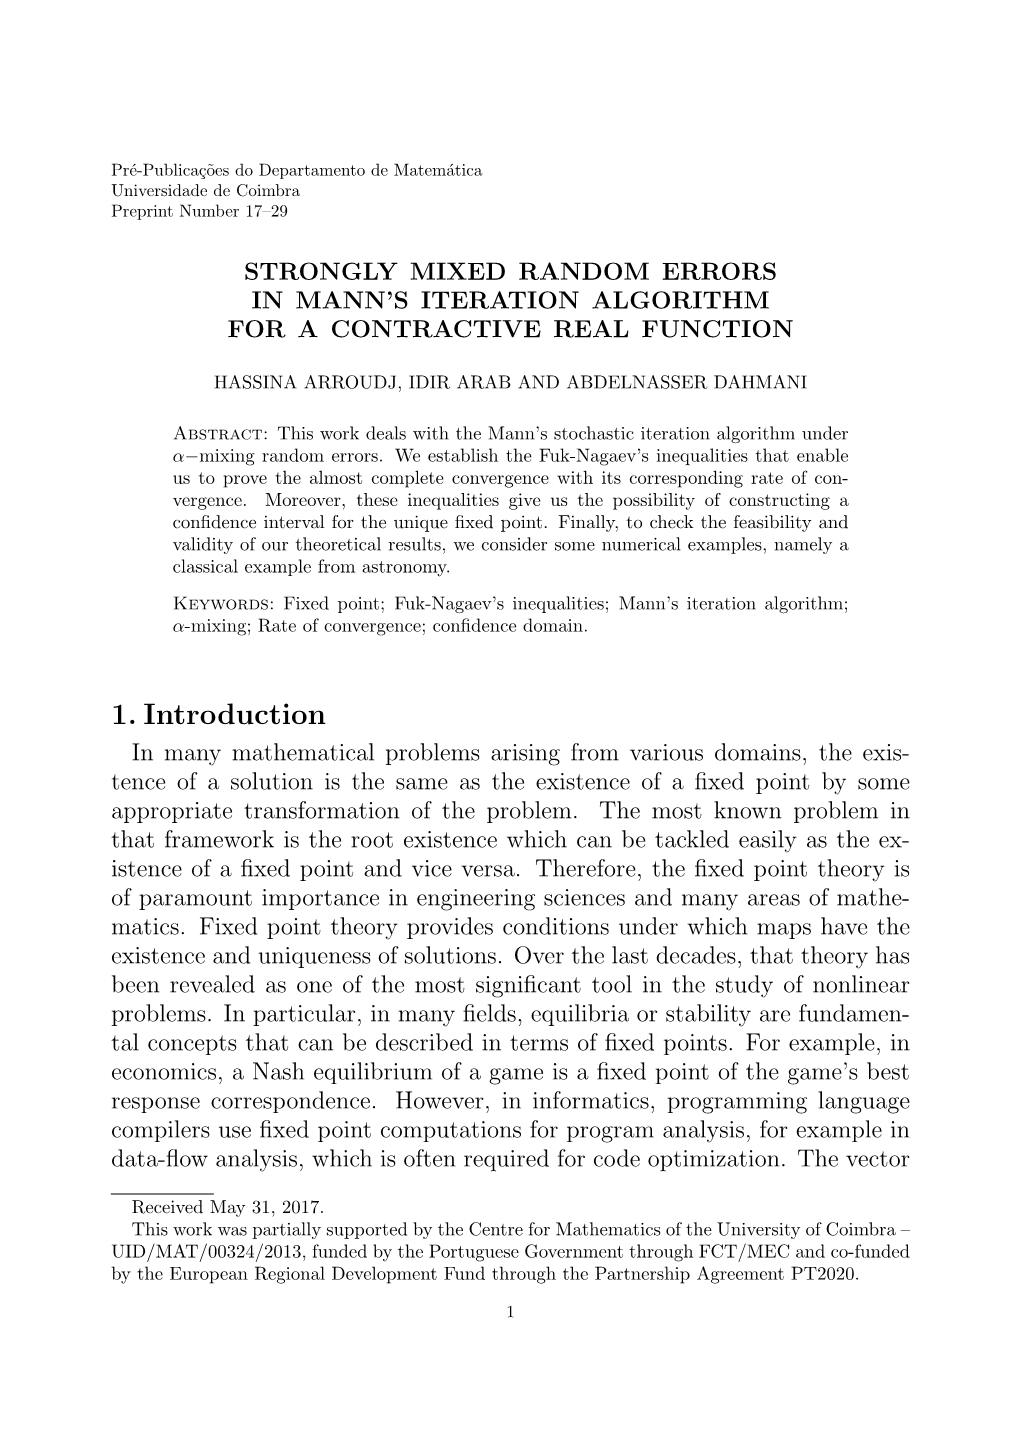 Strongly Mixed Random Errors in Mann's Iteration Algorithm for a Contractive Real Function